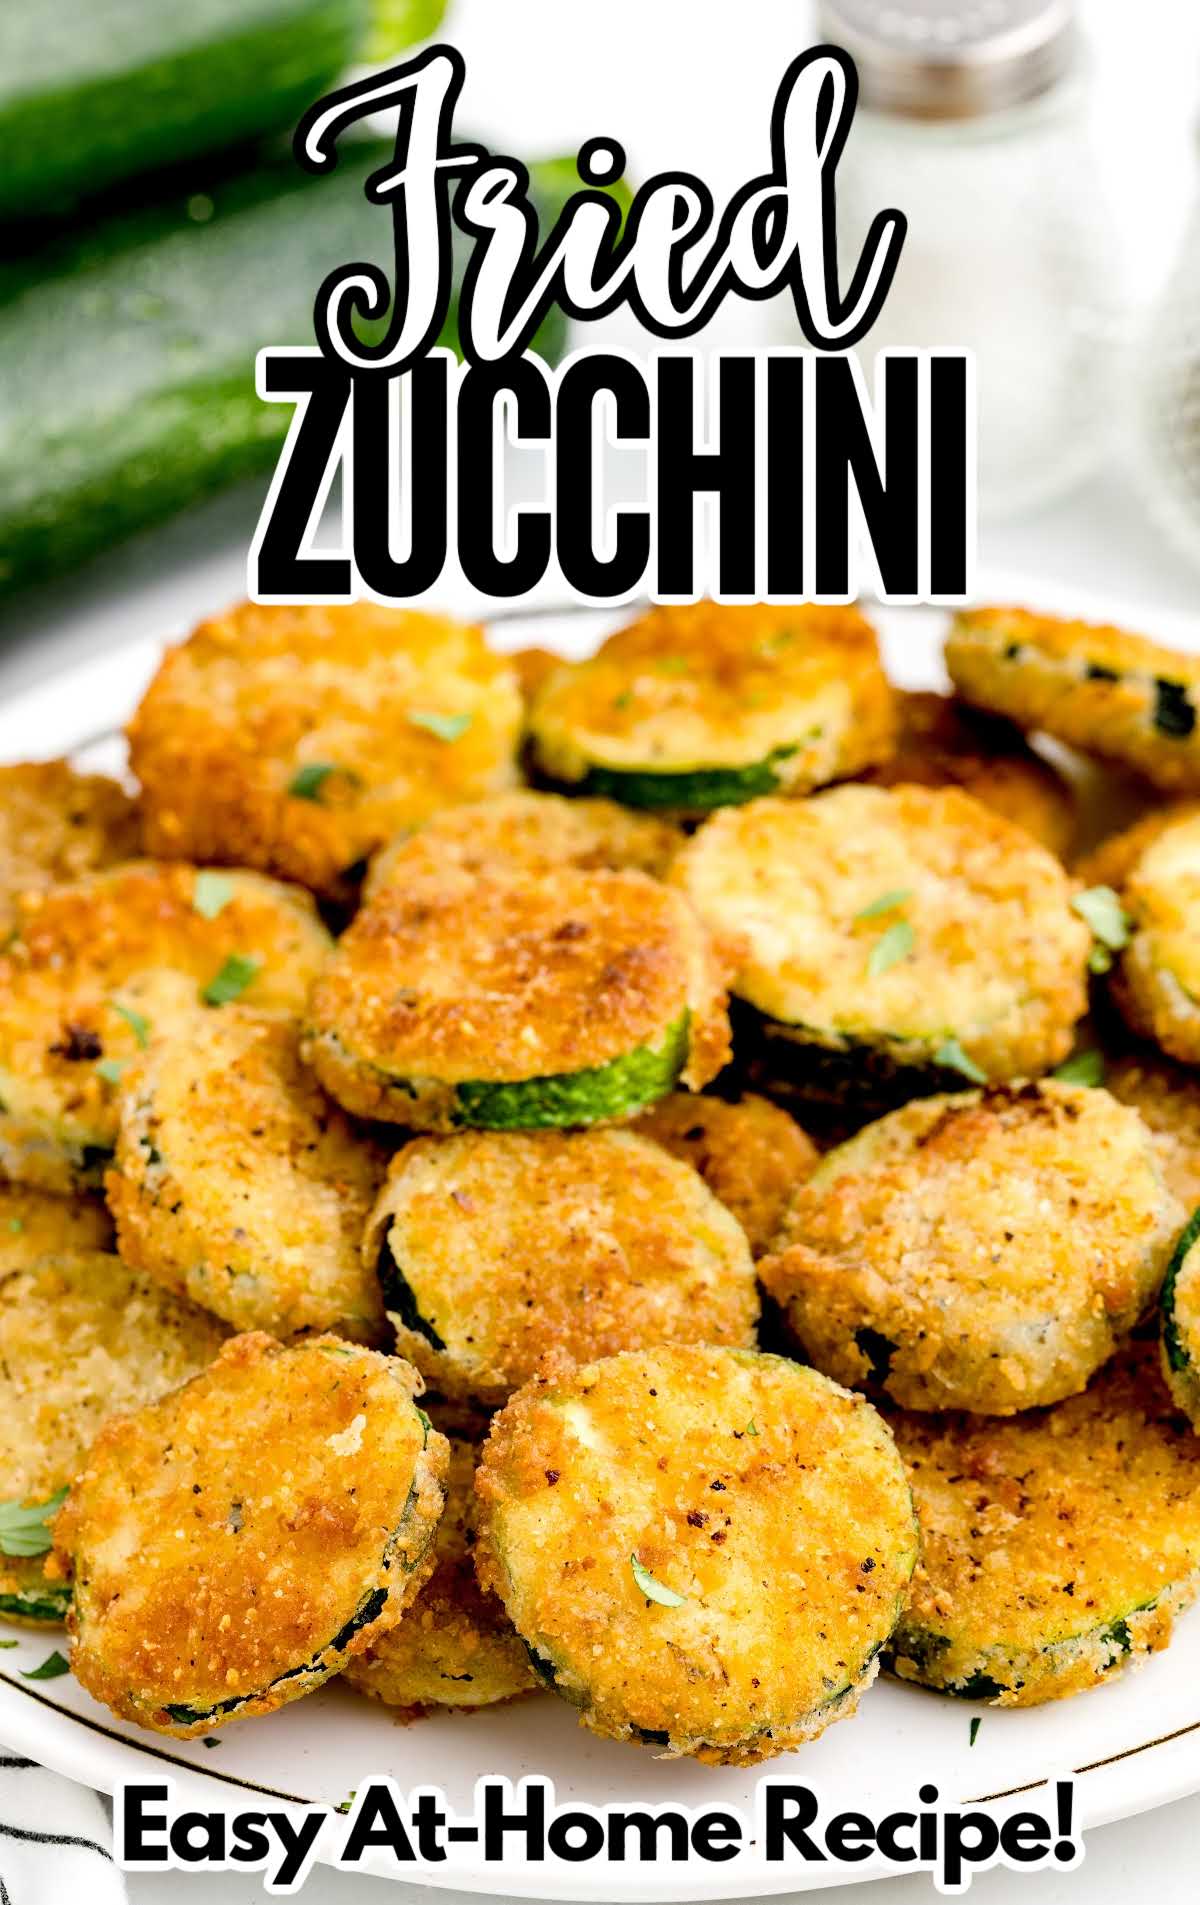 A plate of food, with Fried zucchini and side